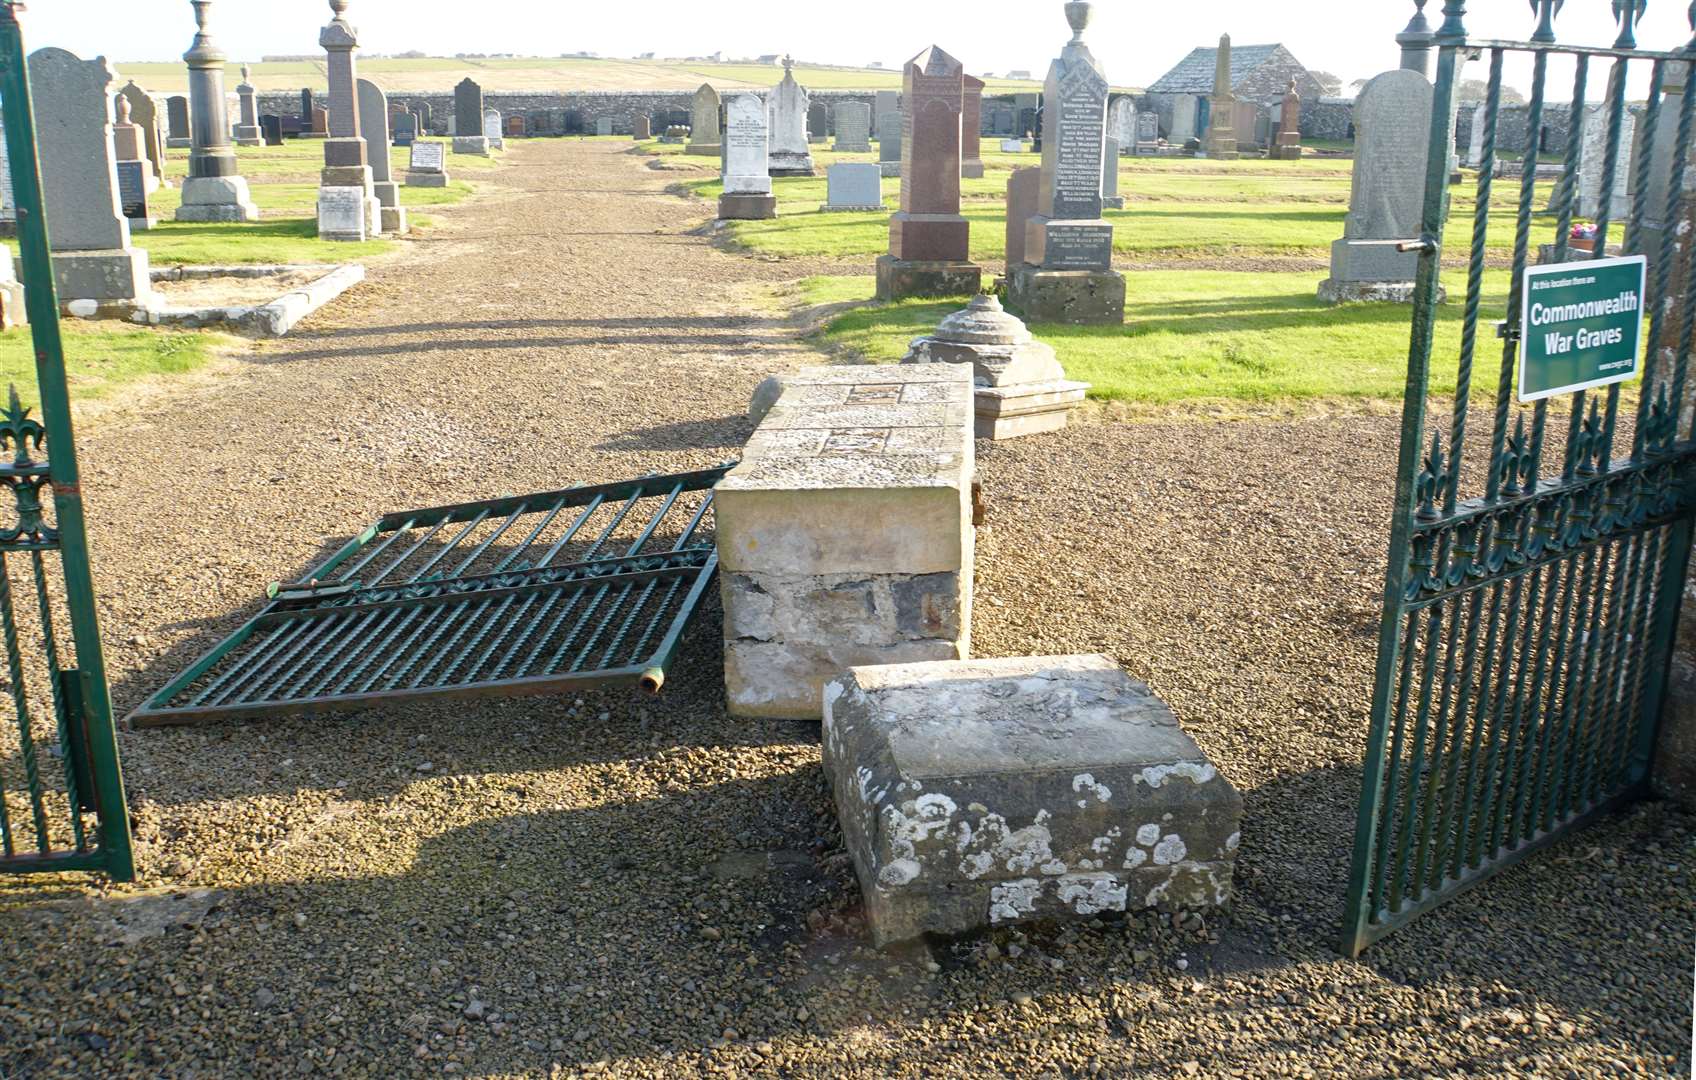 The large sandstone pillar lies smashed into four pieces at the entrance to Corsback cemetery. Pictures: DGS